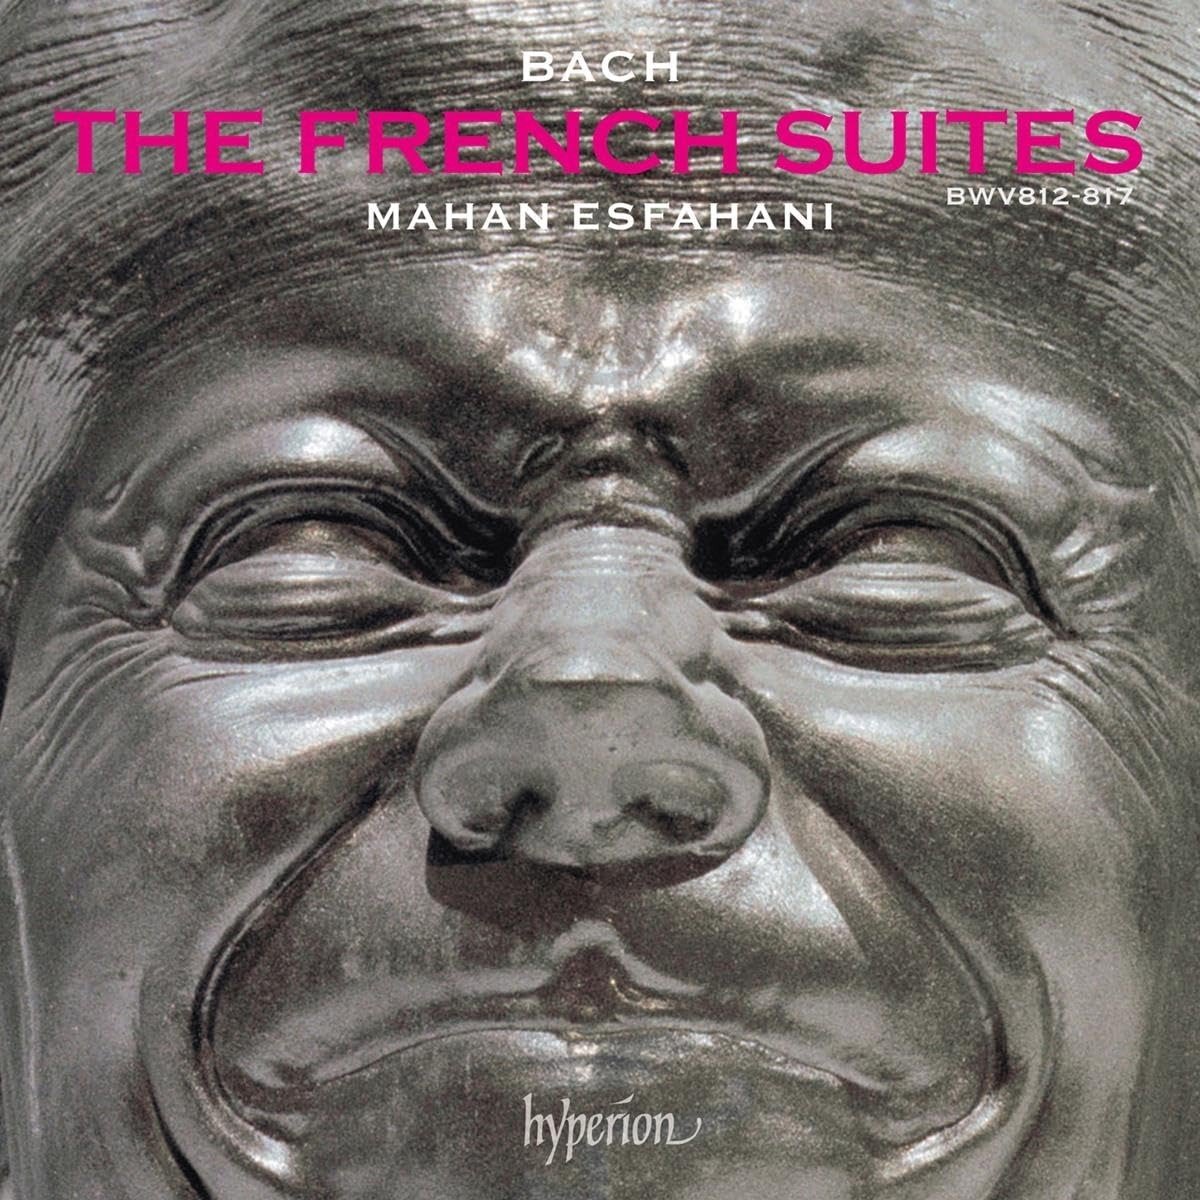 CD Shop - ESFAHANI, MAHAN BACH: THE FRENCH SUITES